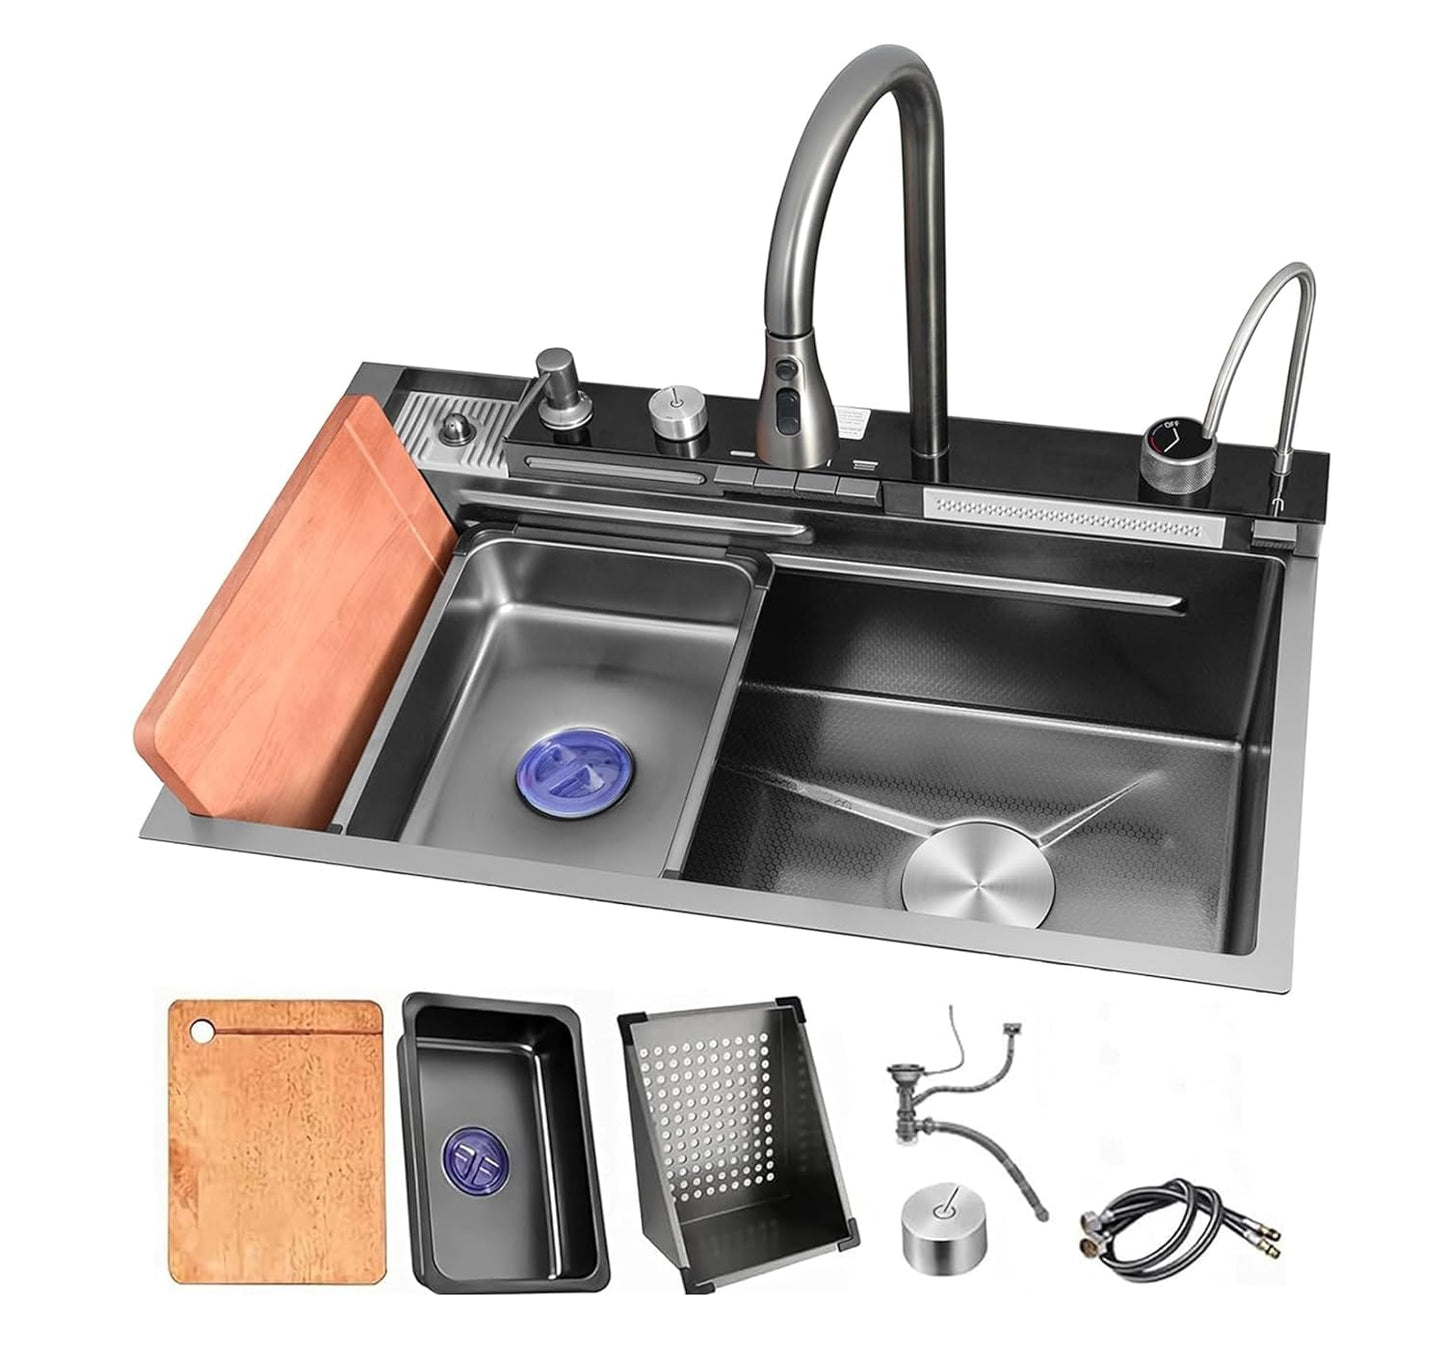 Fossa 30"x18"x10" inch Piano Fully Equipped Kitchen Sink with Integrated Waterfall and Pull-down Faucets - SS-304 Grade Stainless Steel Sink with LED Pannel and Digital Display - Nano Black Finish